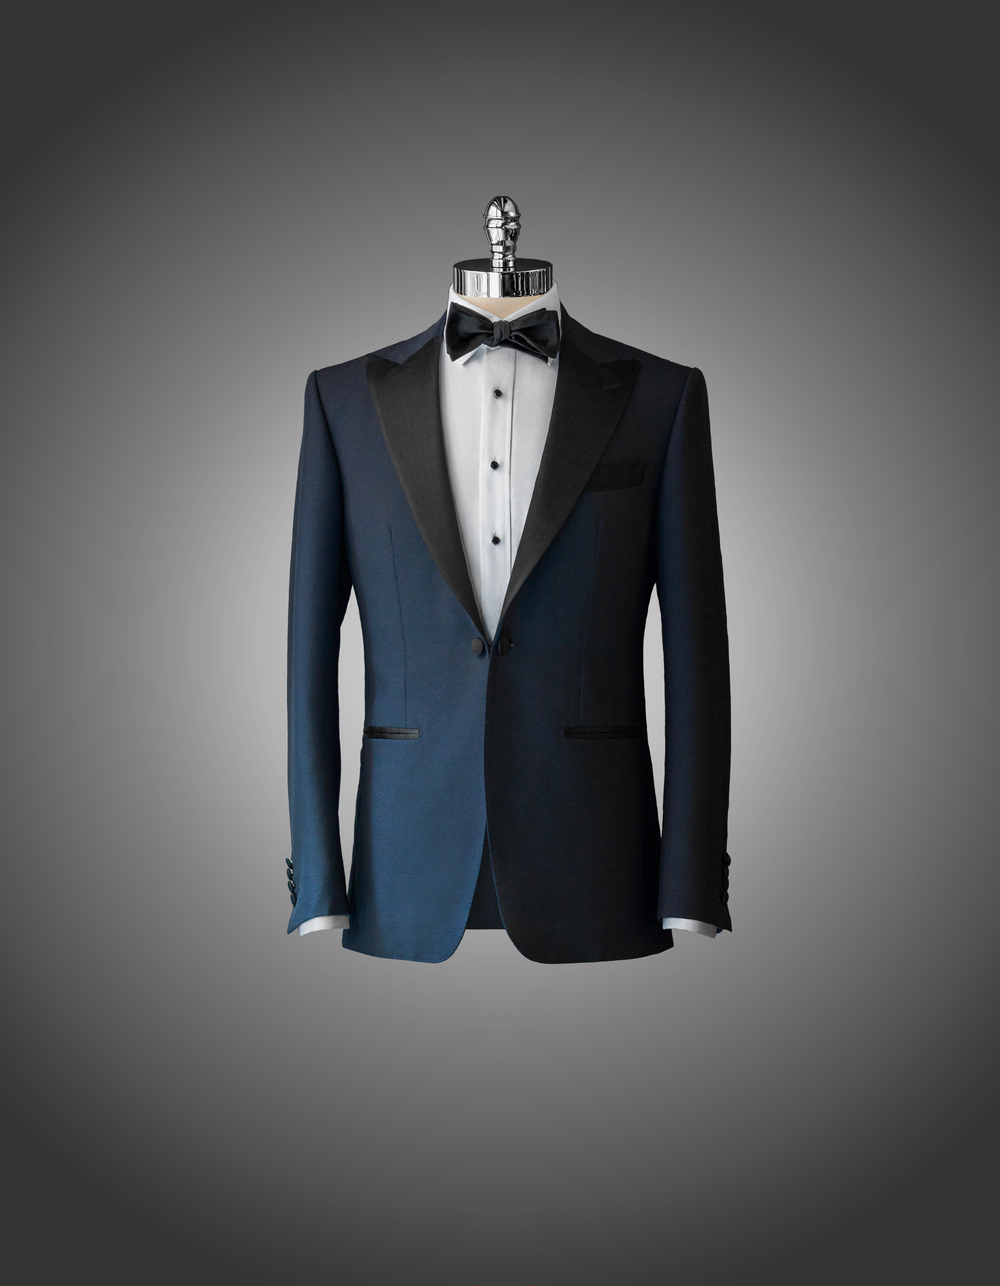 Michael Andrews Bespoke knows a thing or two about Tuxedos